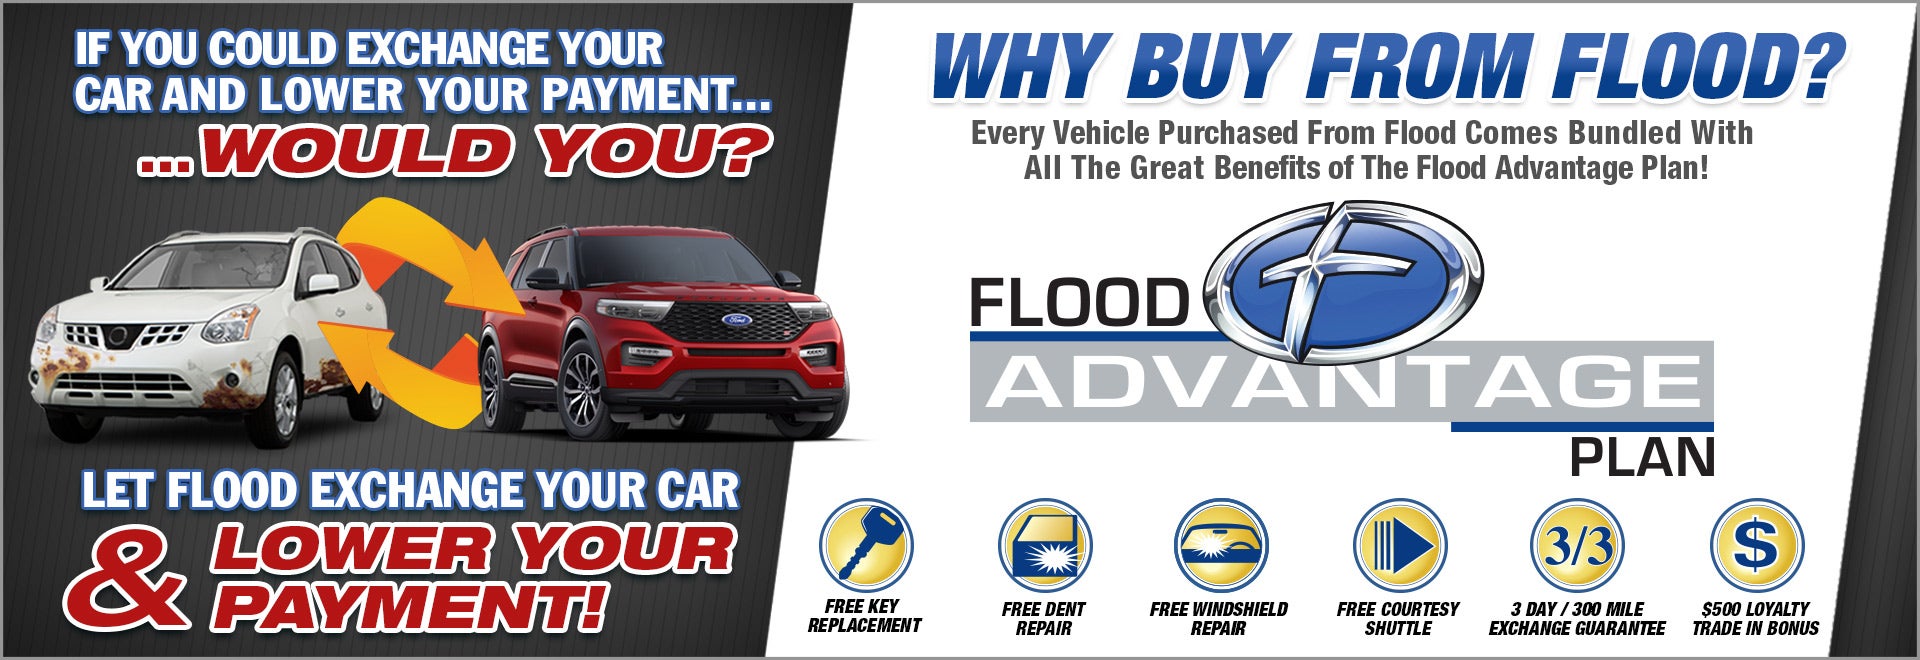 Lower prices AND the Flood Advantage Plan!